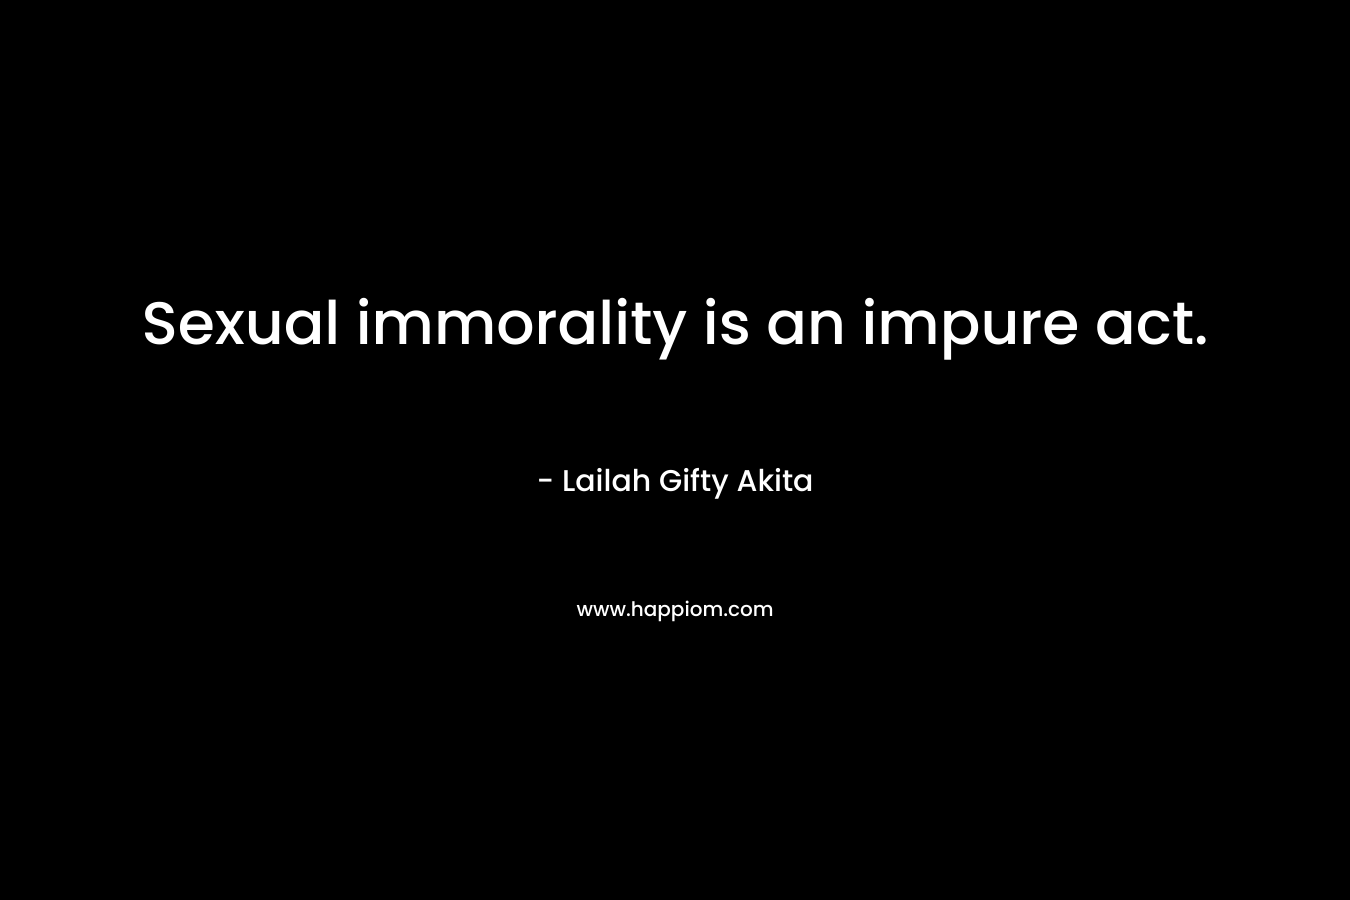 Sexual immorality is an impure act.